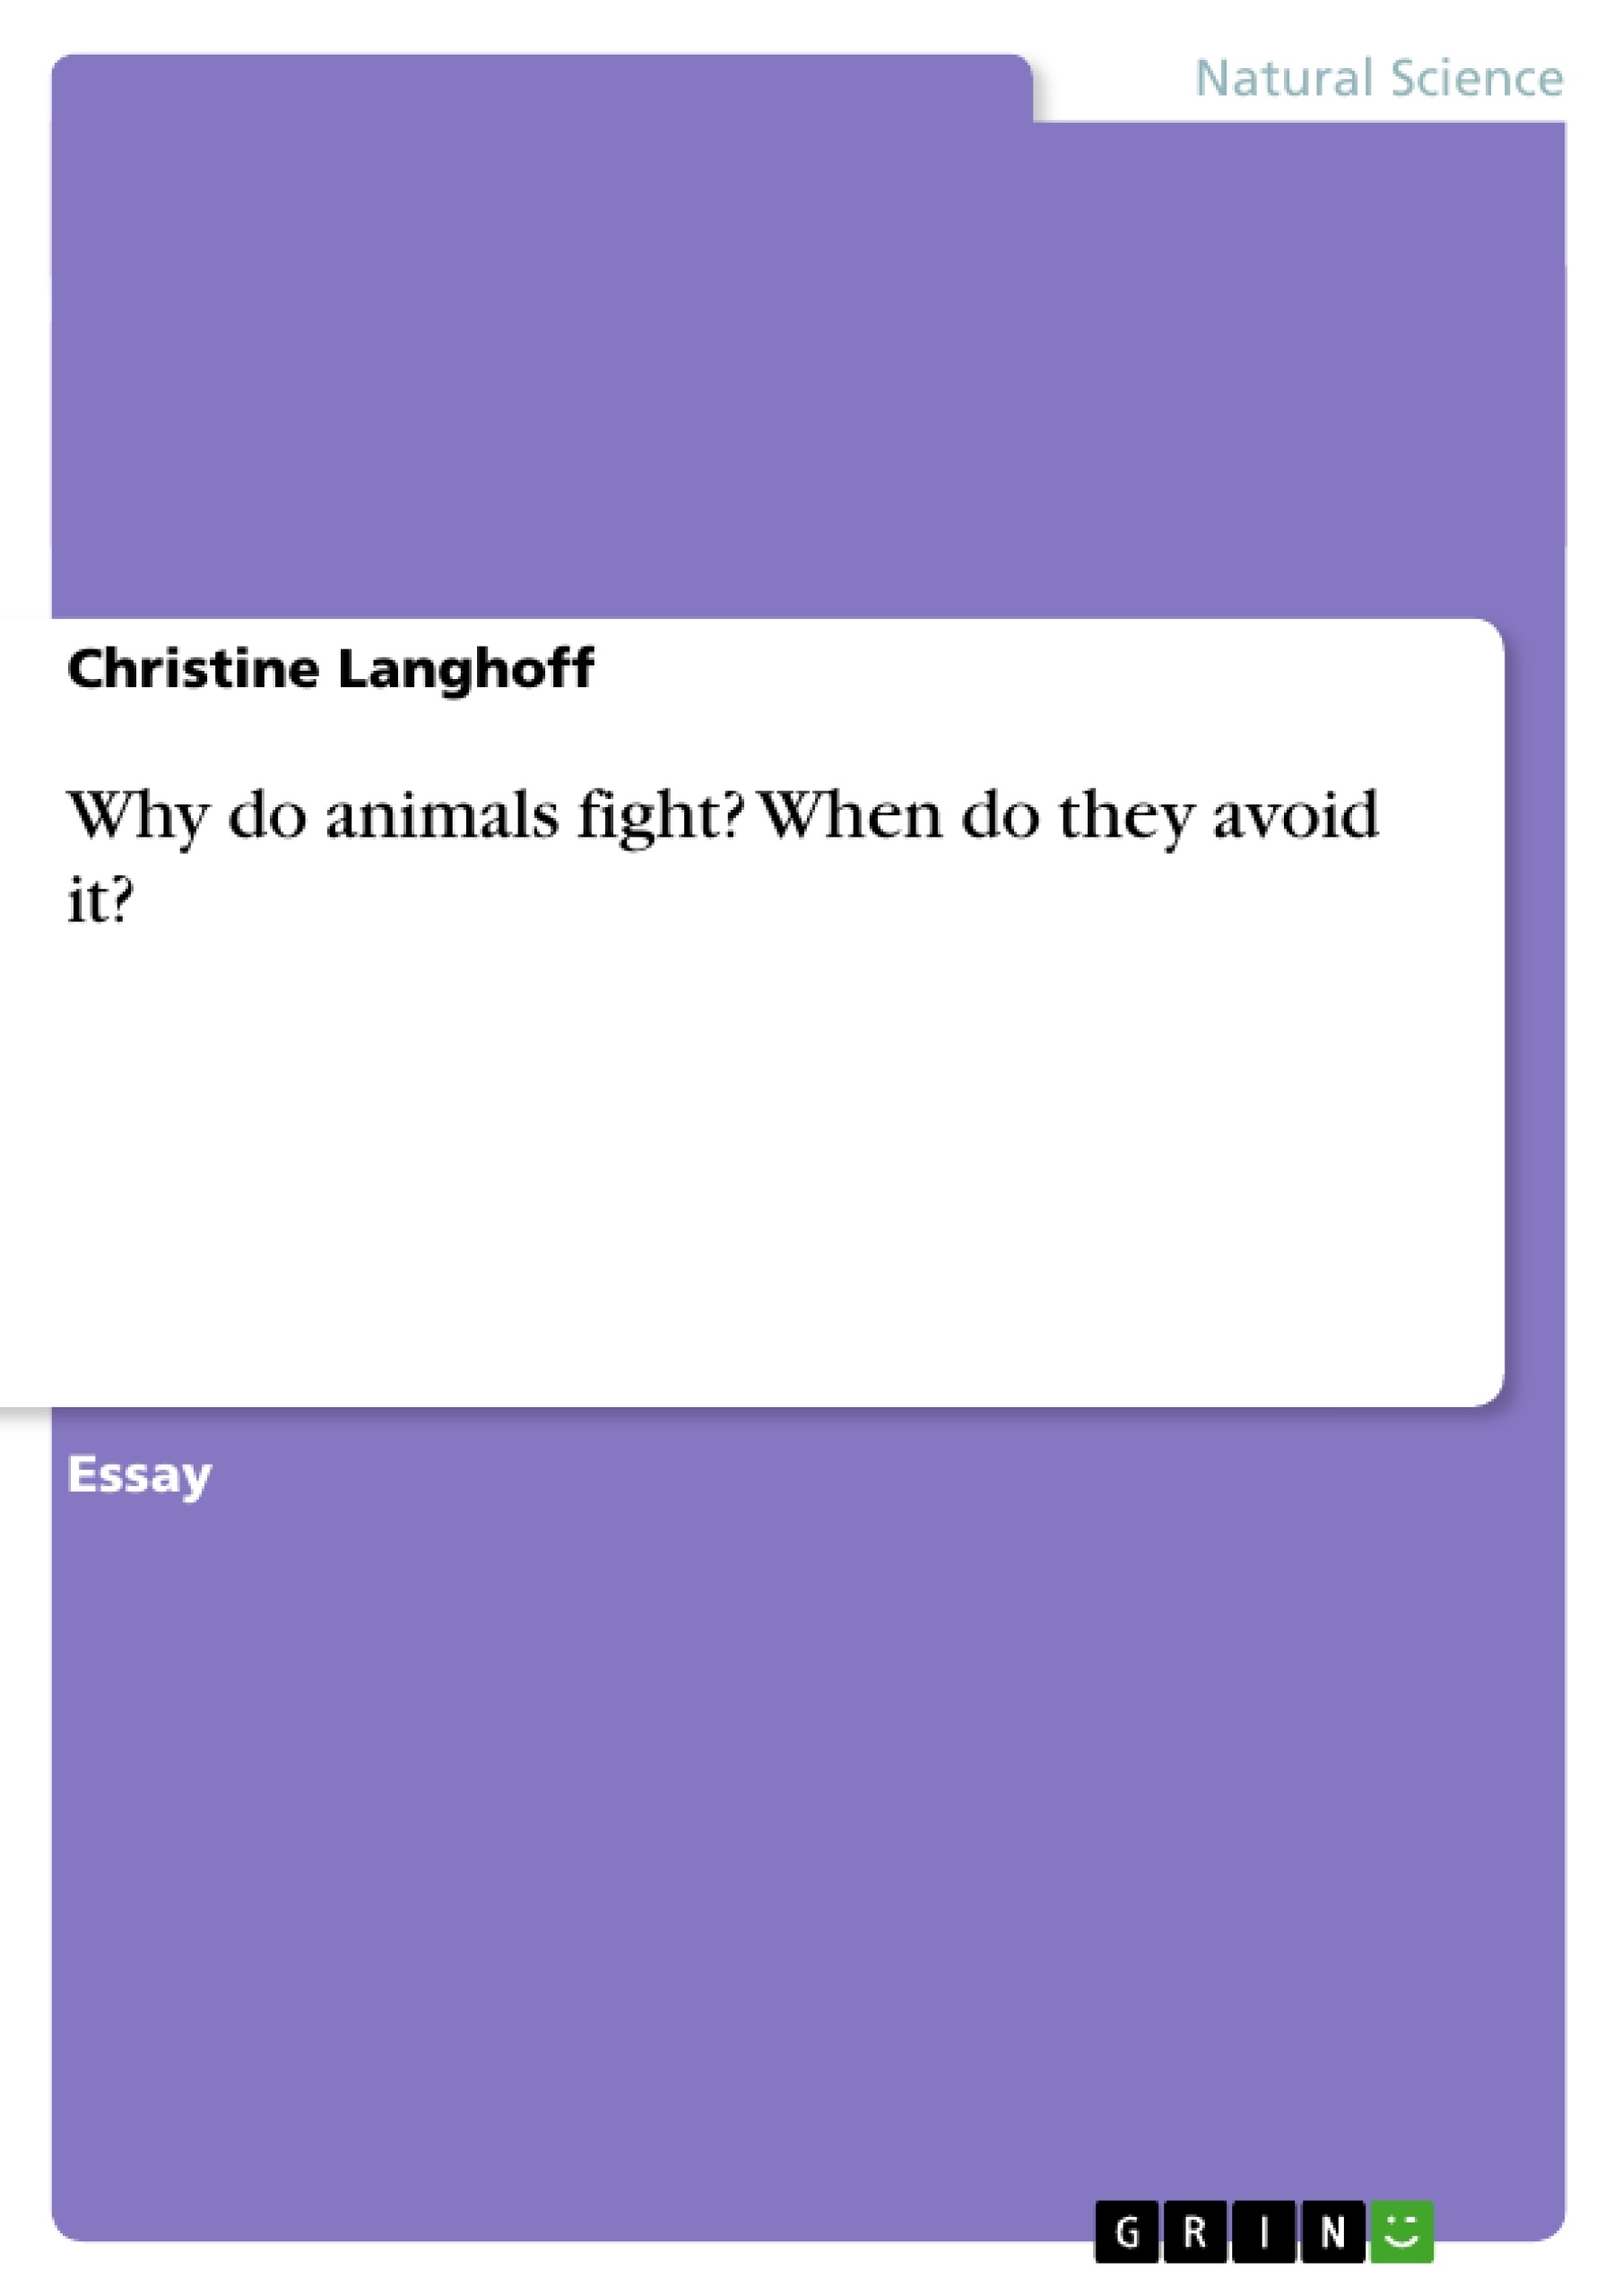 Title: Why do animals fight? When do they avoid it?